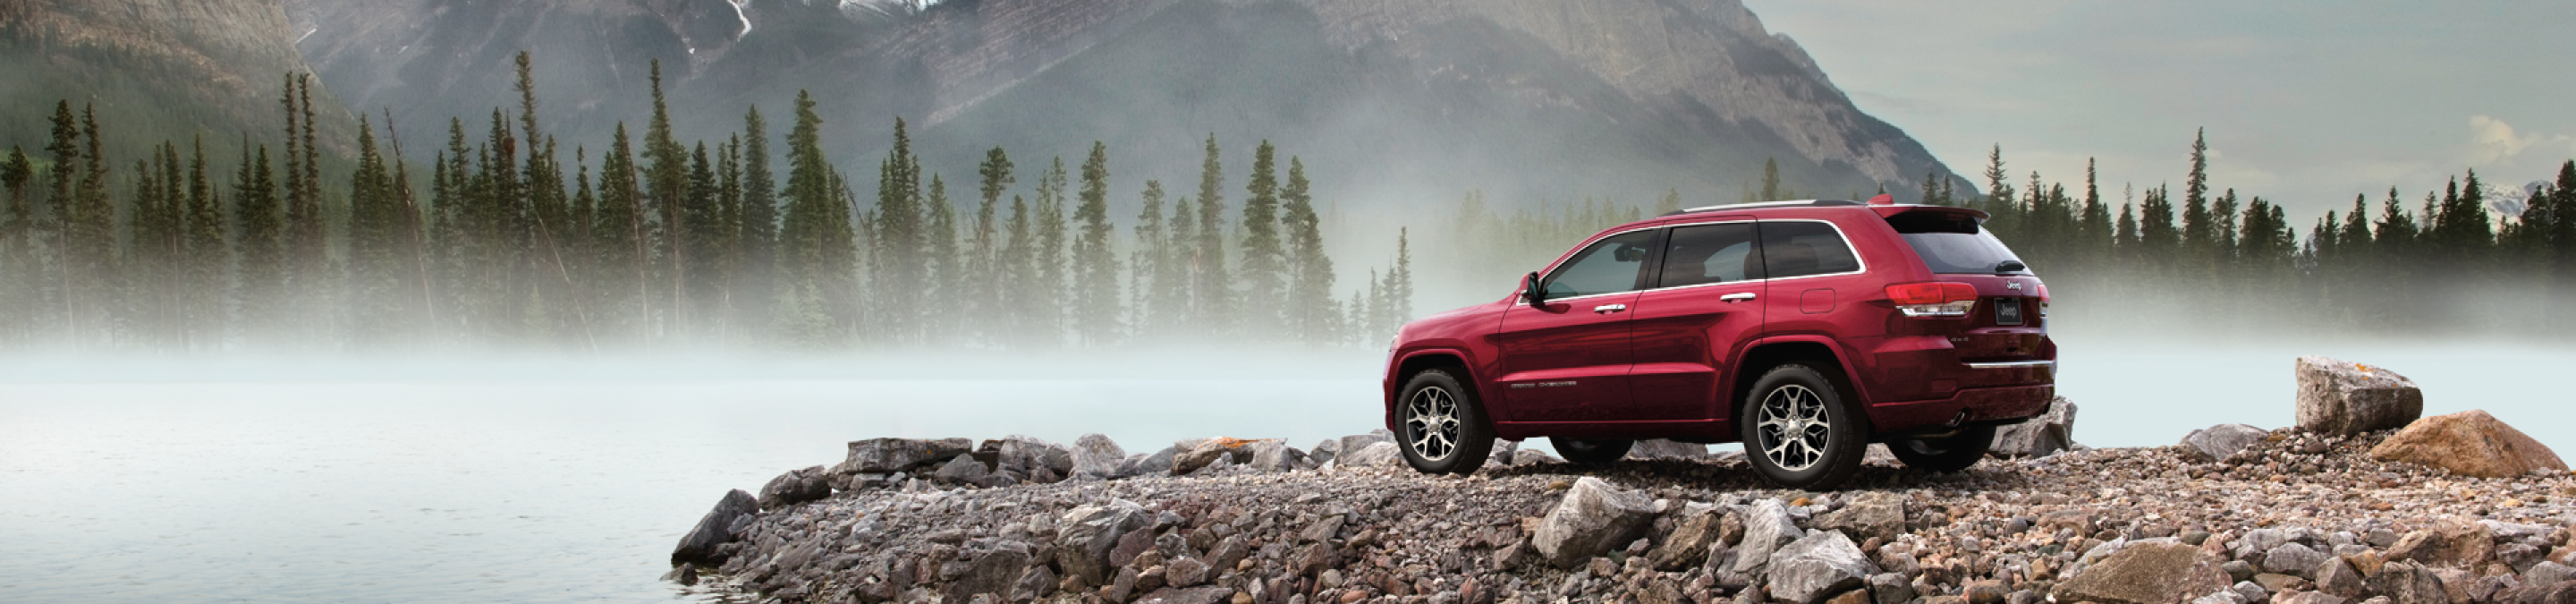 Grand Cherokee The New Frontier Of Active Safety And Security